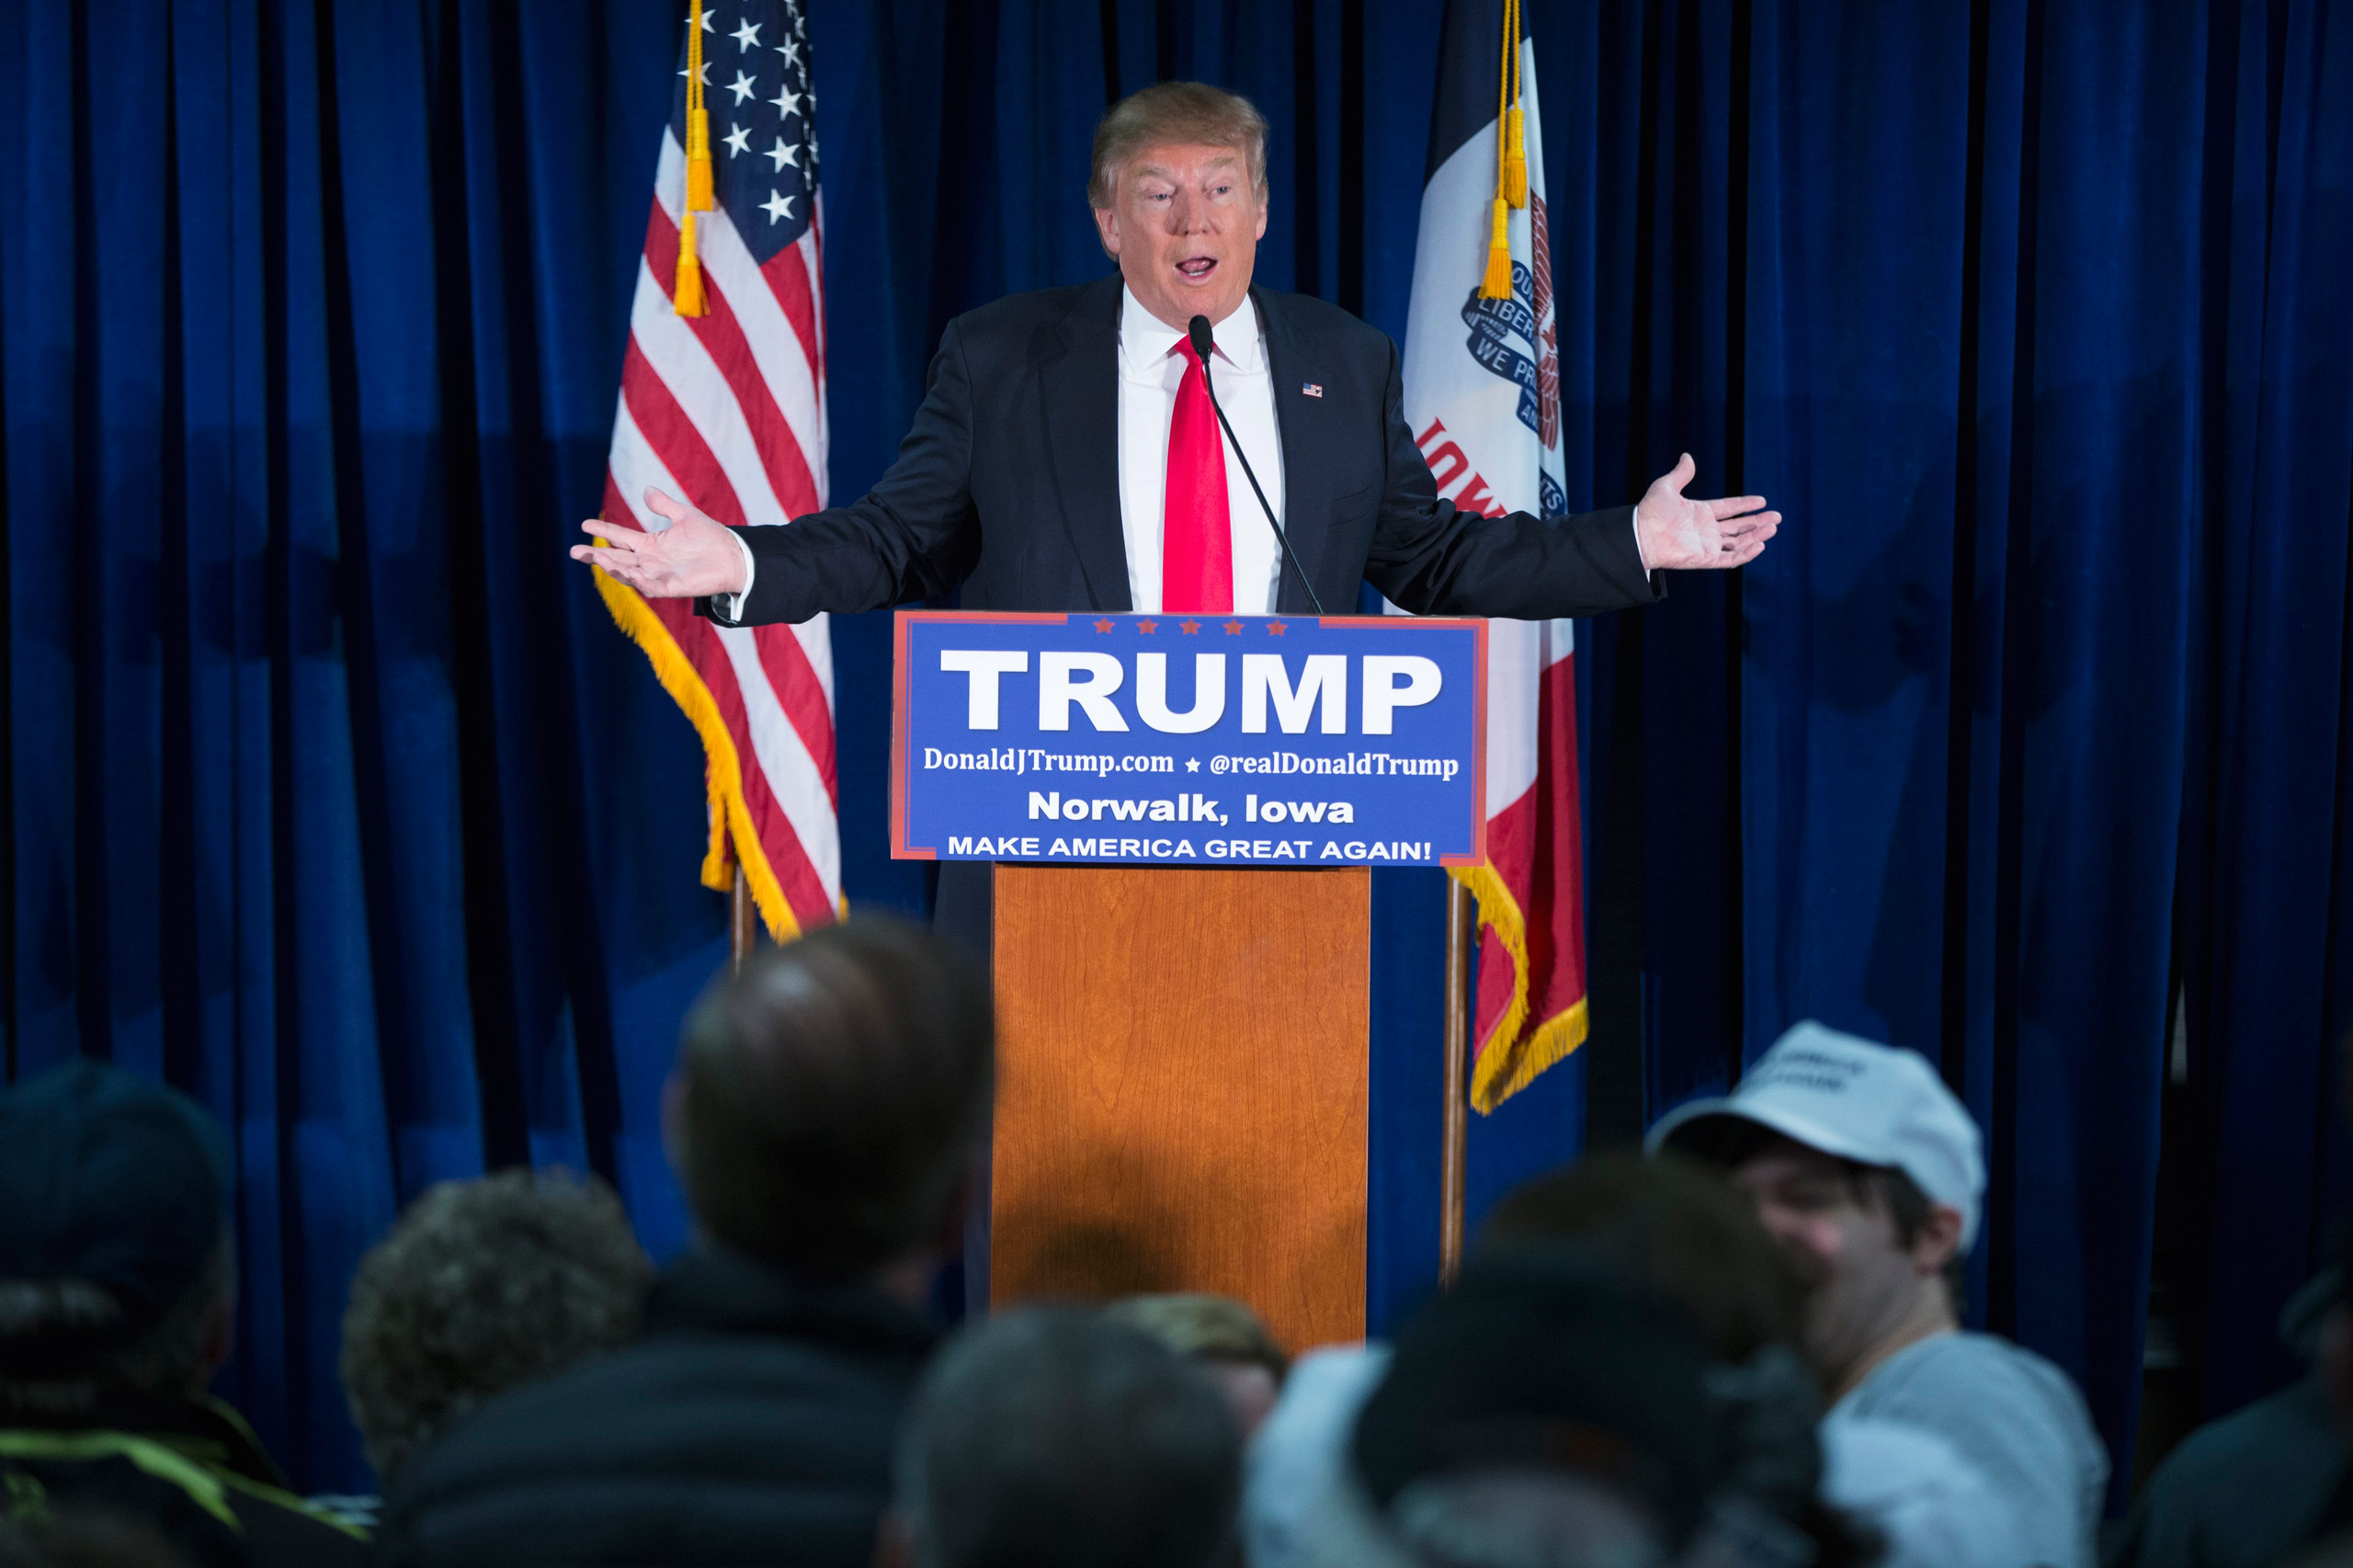 Republican presidential candidate Donald Trump speaks during a campaign event, Wednesday, Jan. 20, 2016, in Norwalk, Iowa. (AP Photo/Evan Vucci)